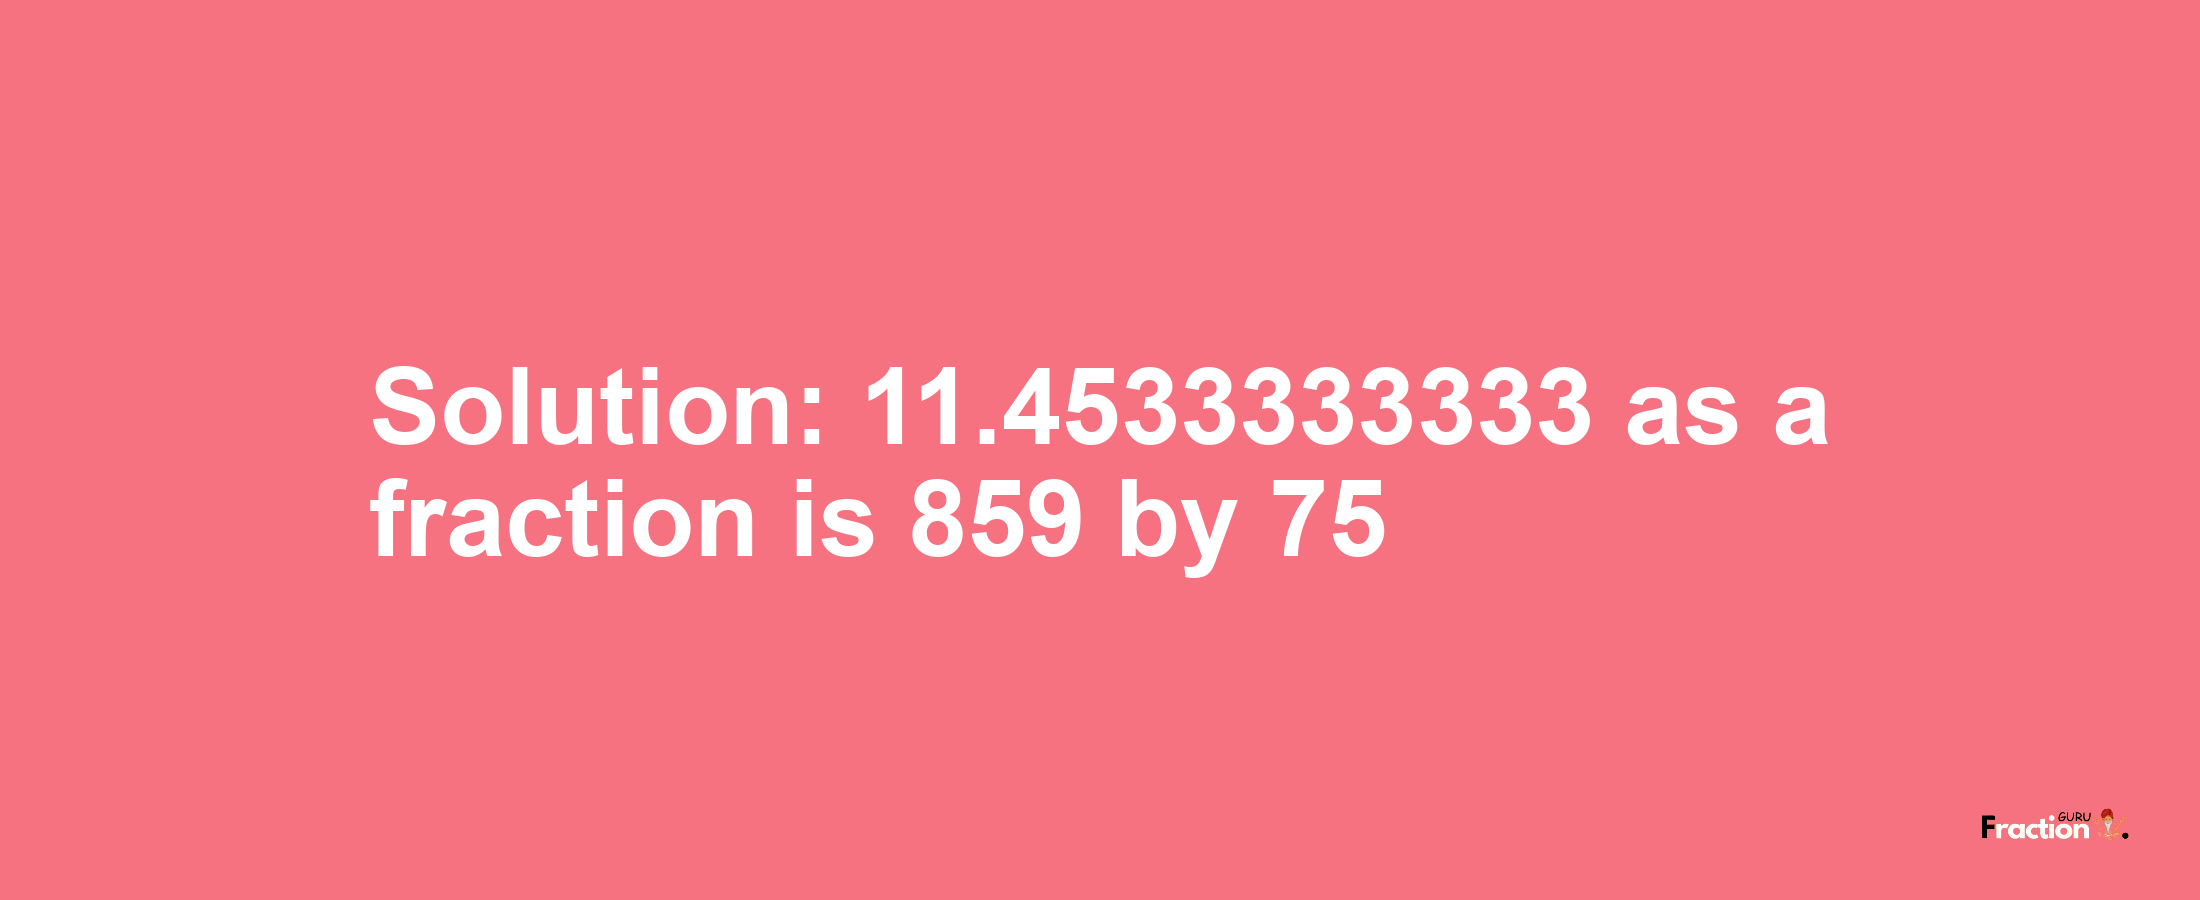 Solution:11.4533333333 as a fraction is 859/75